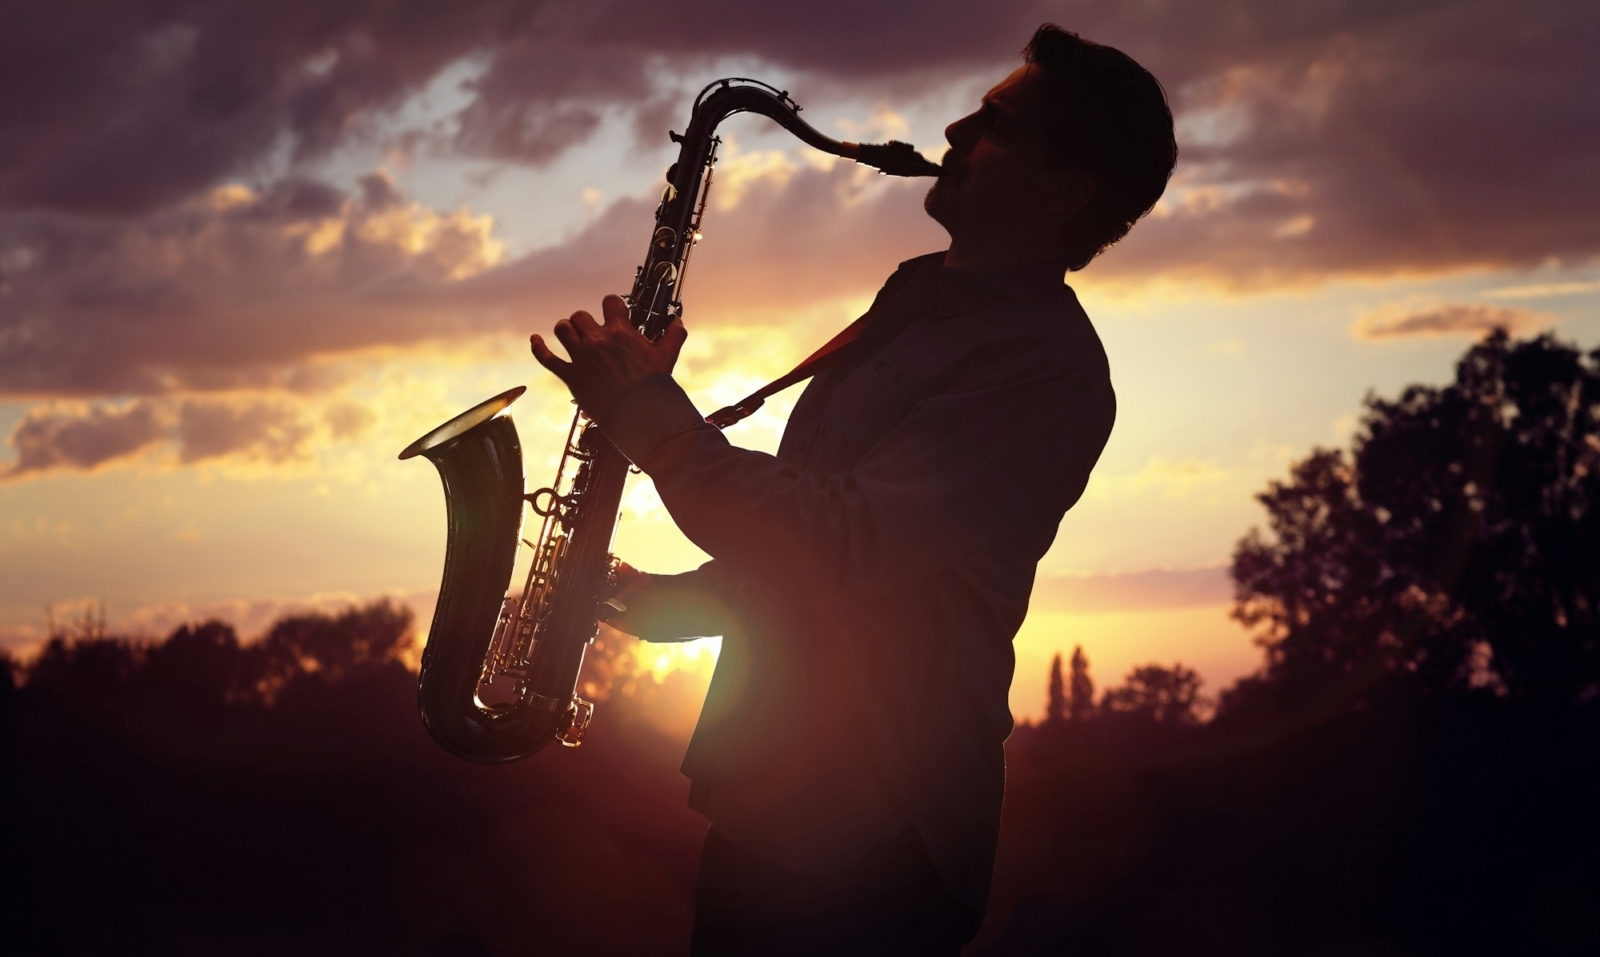 Saxophonist playing sax against sunset